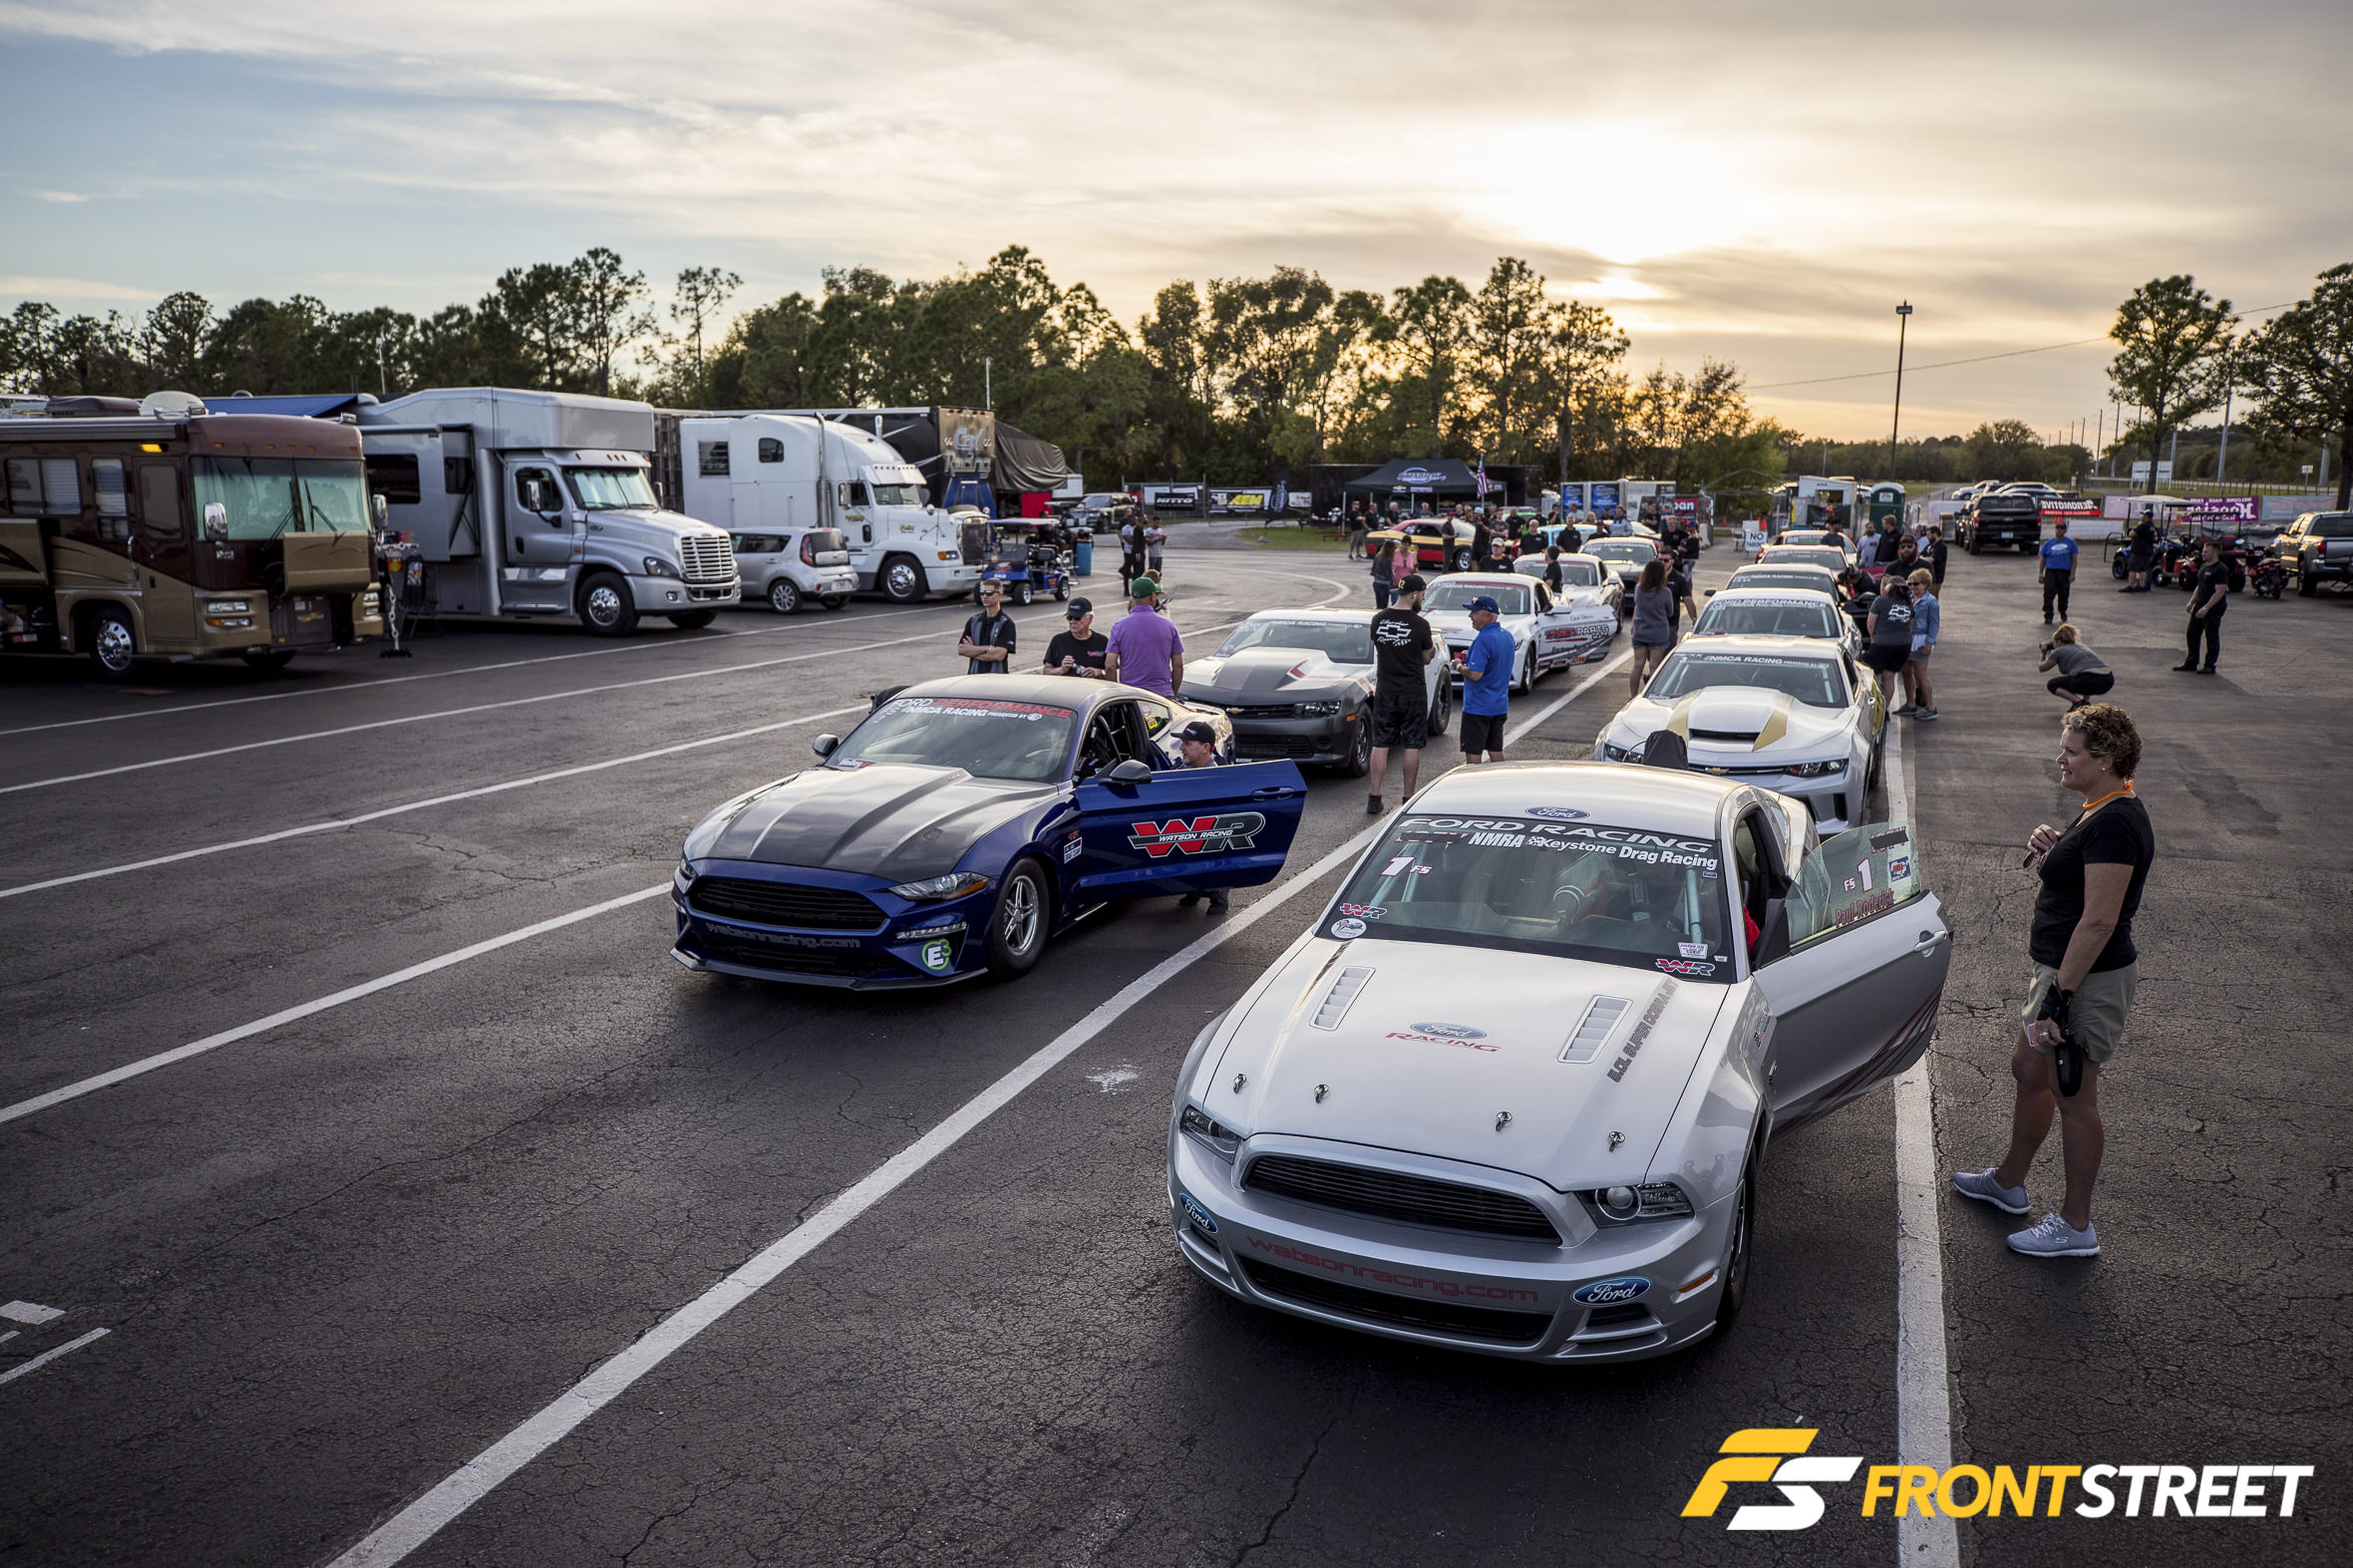 The NMCA Kicks Off 2019 In Style: Factory Super Cars & Pro Mods Steal The Show